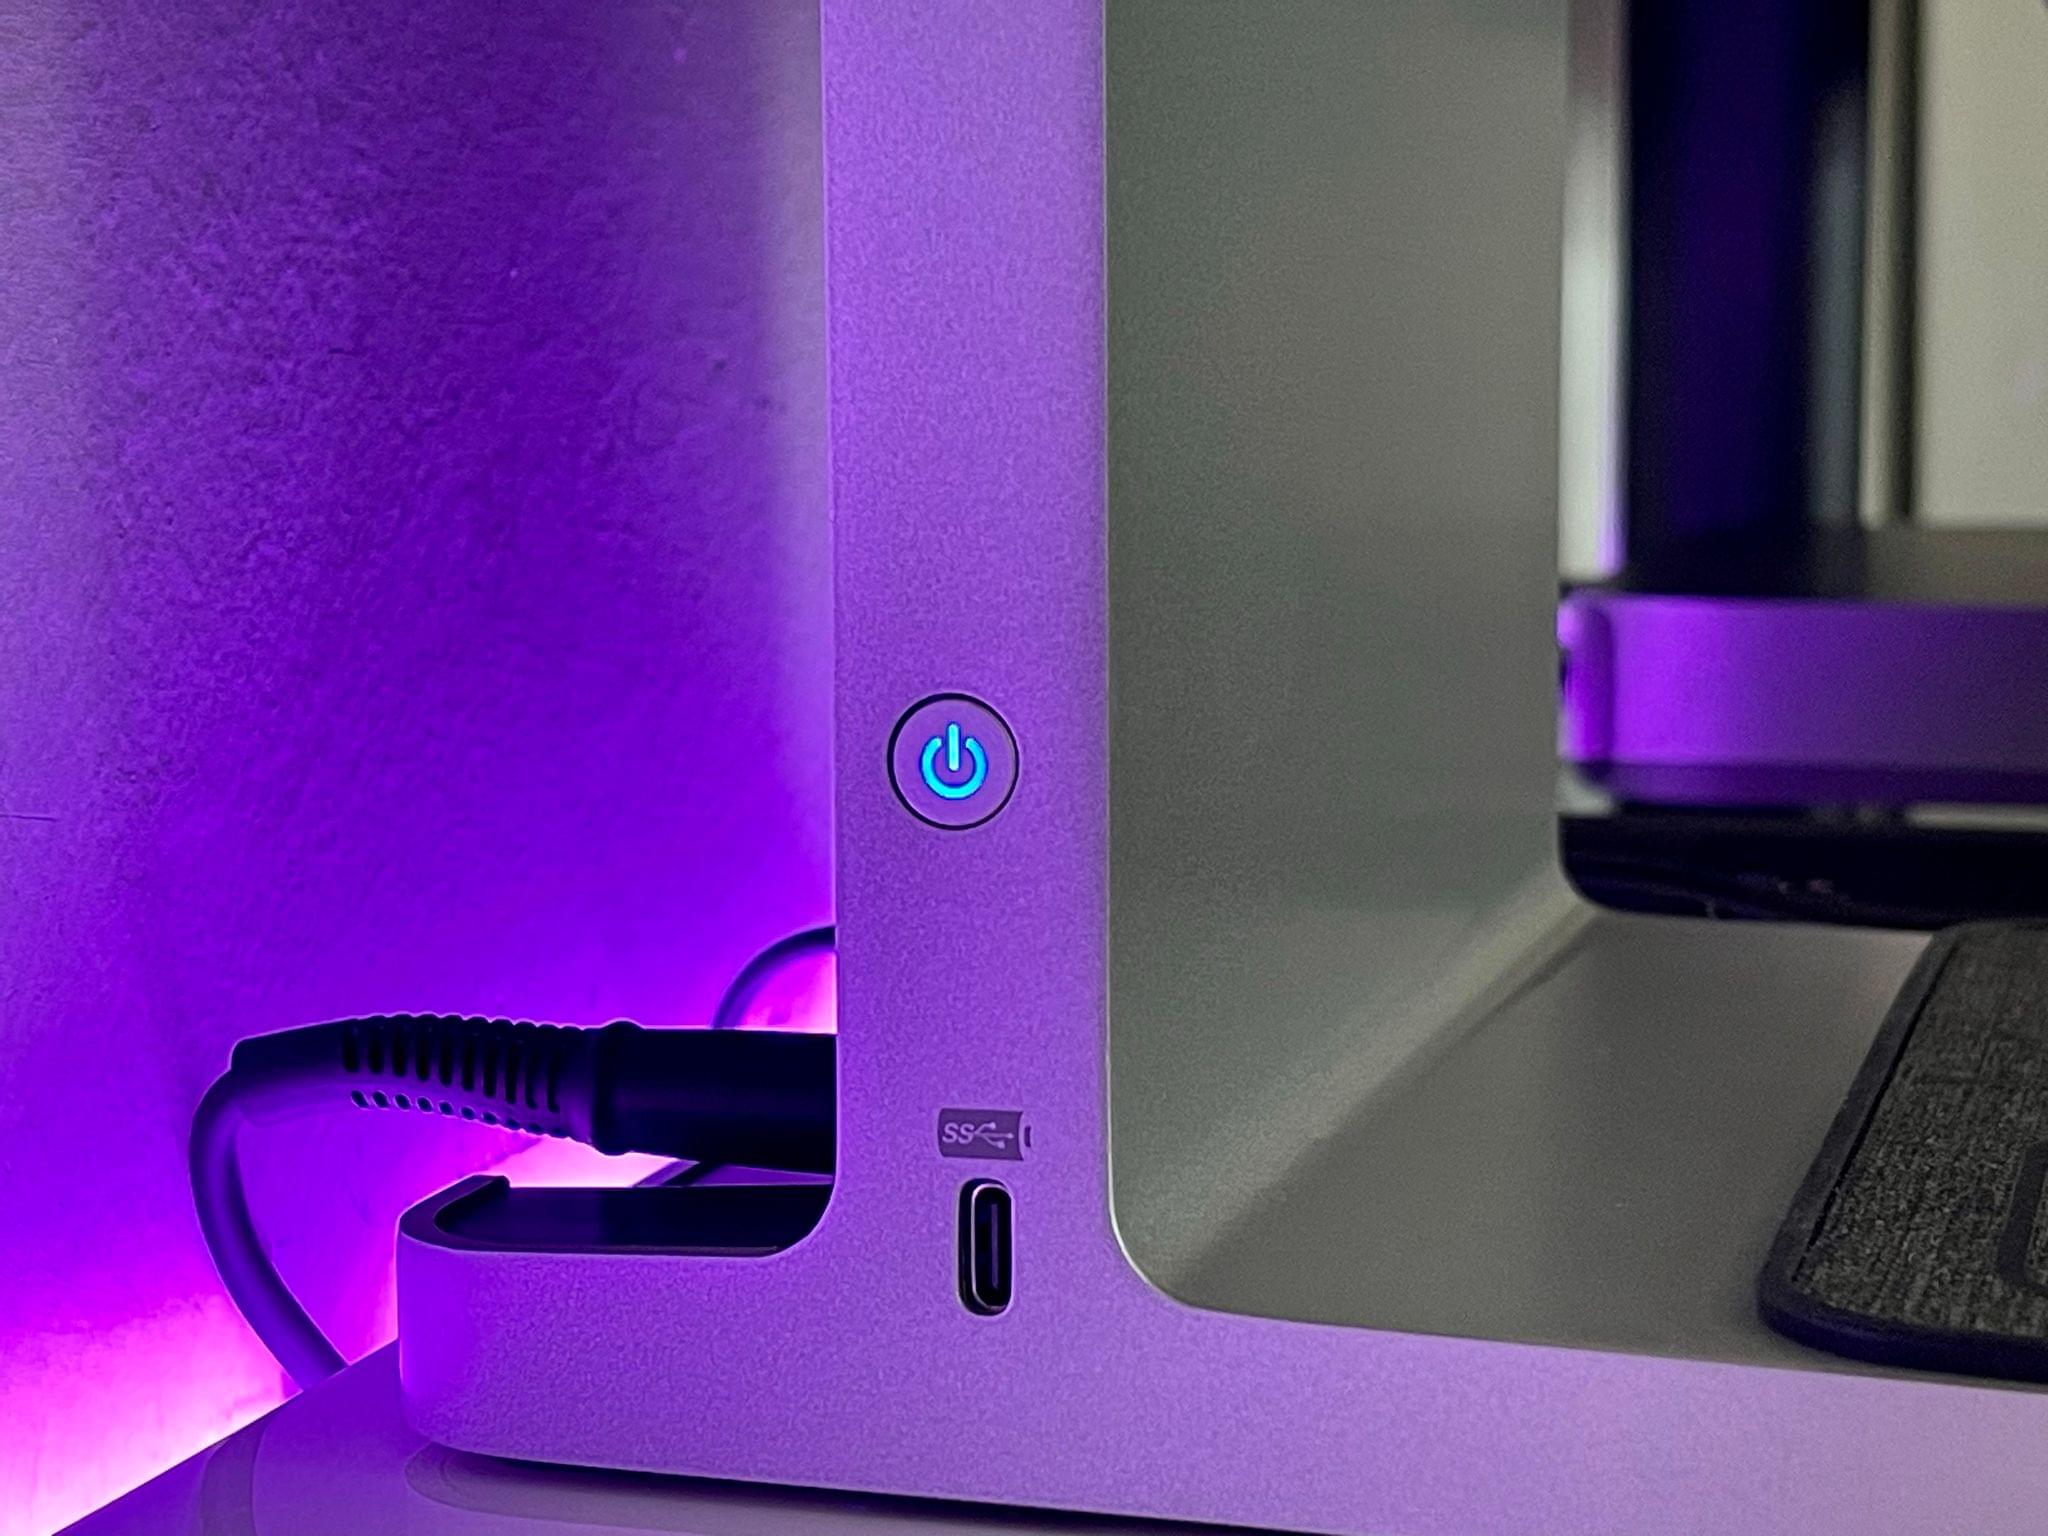 The power button and USB-C port of the StudioDock.